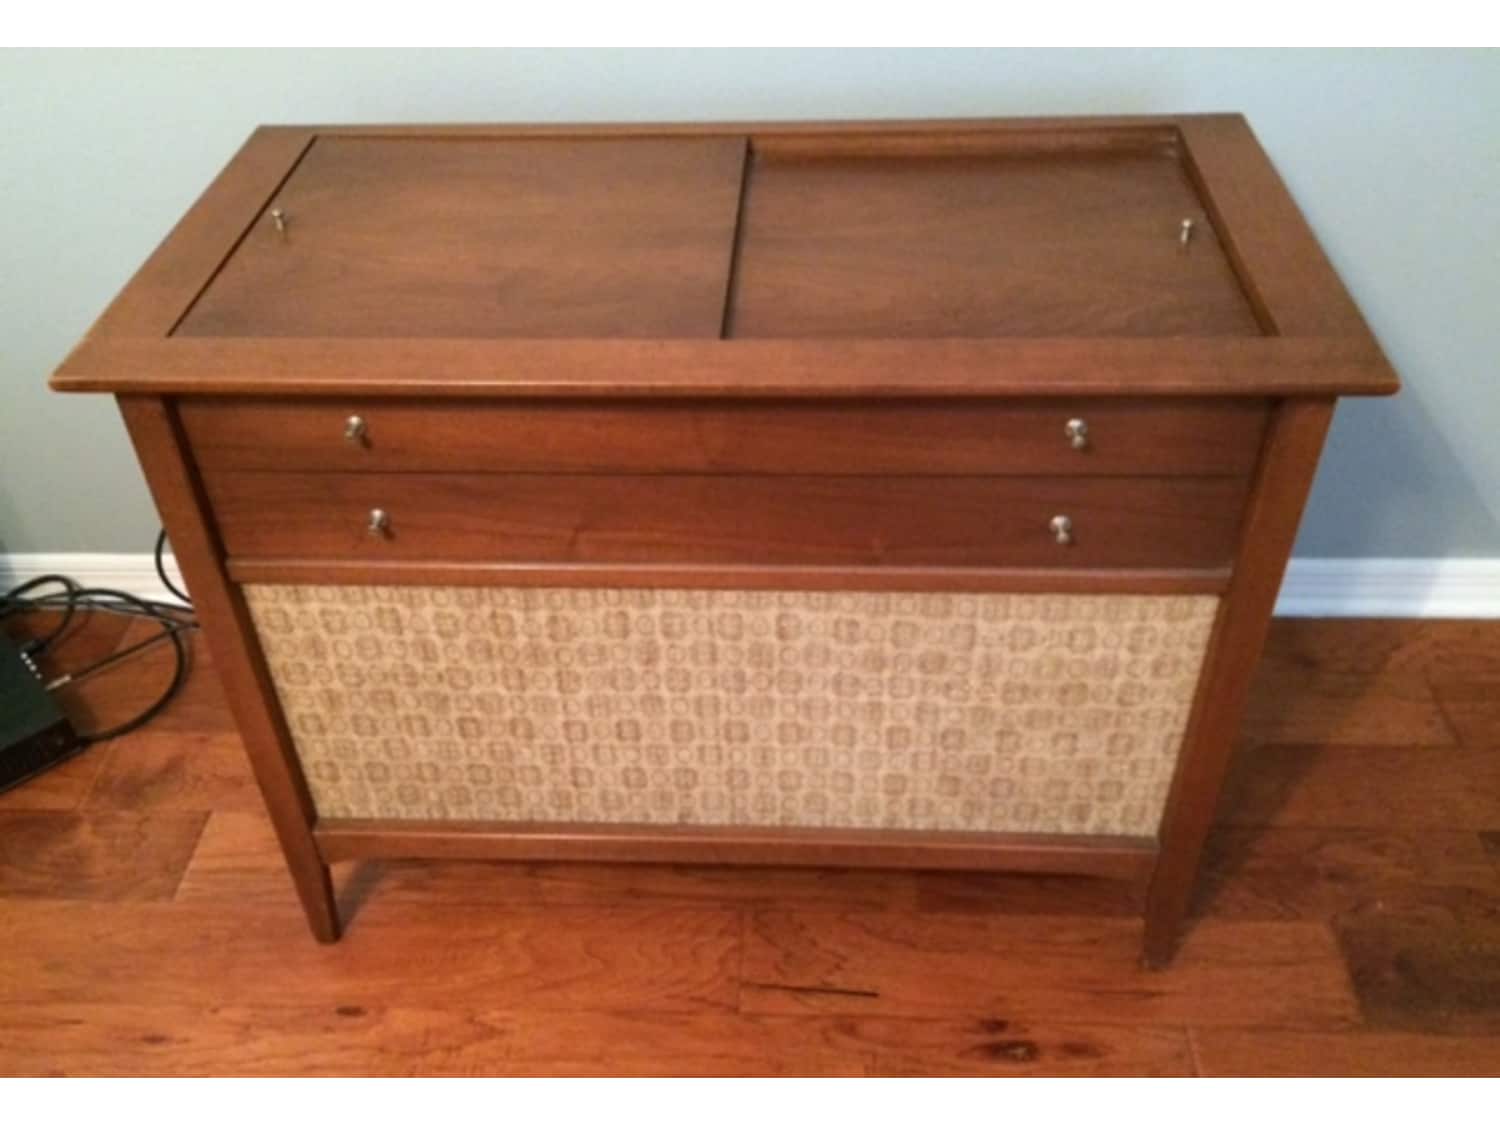 Westinghouse Stereo Console Apartment Therapy S Bazaar